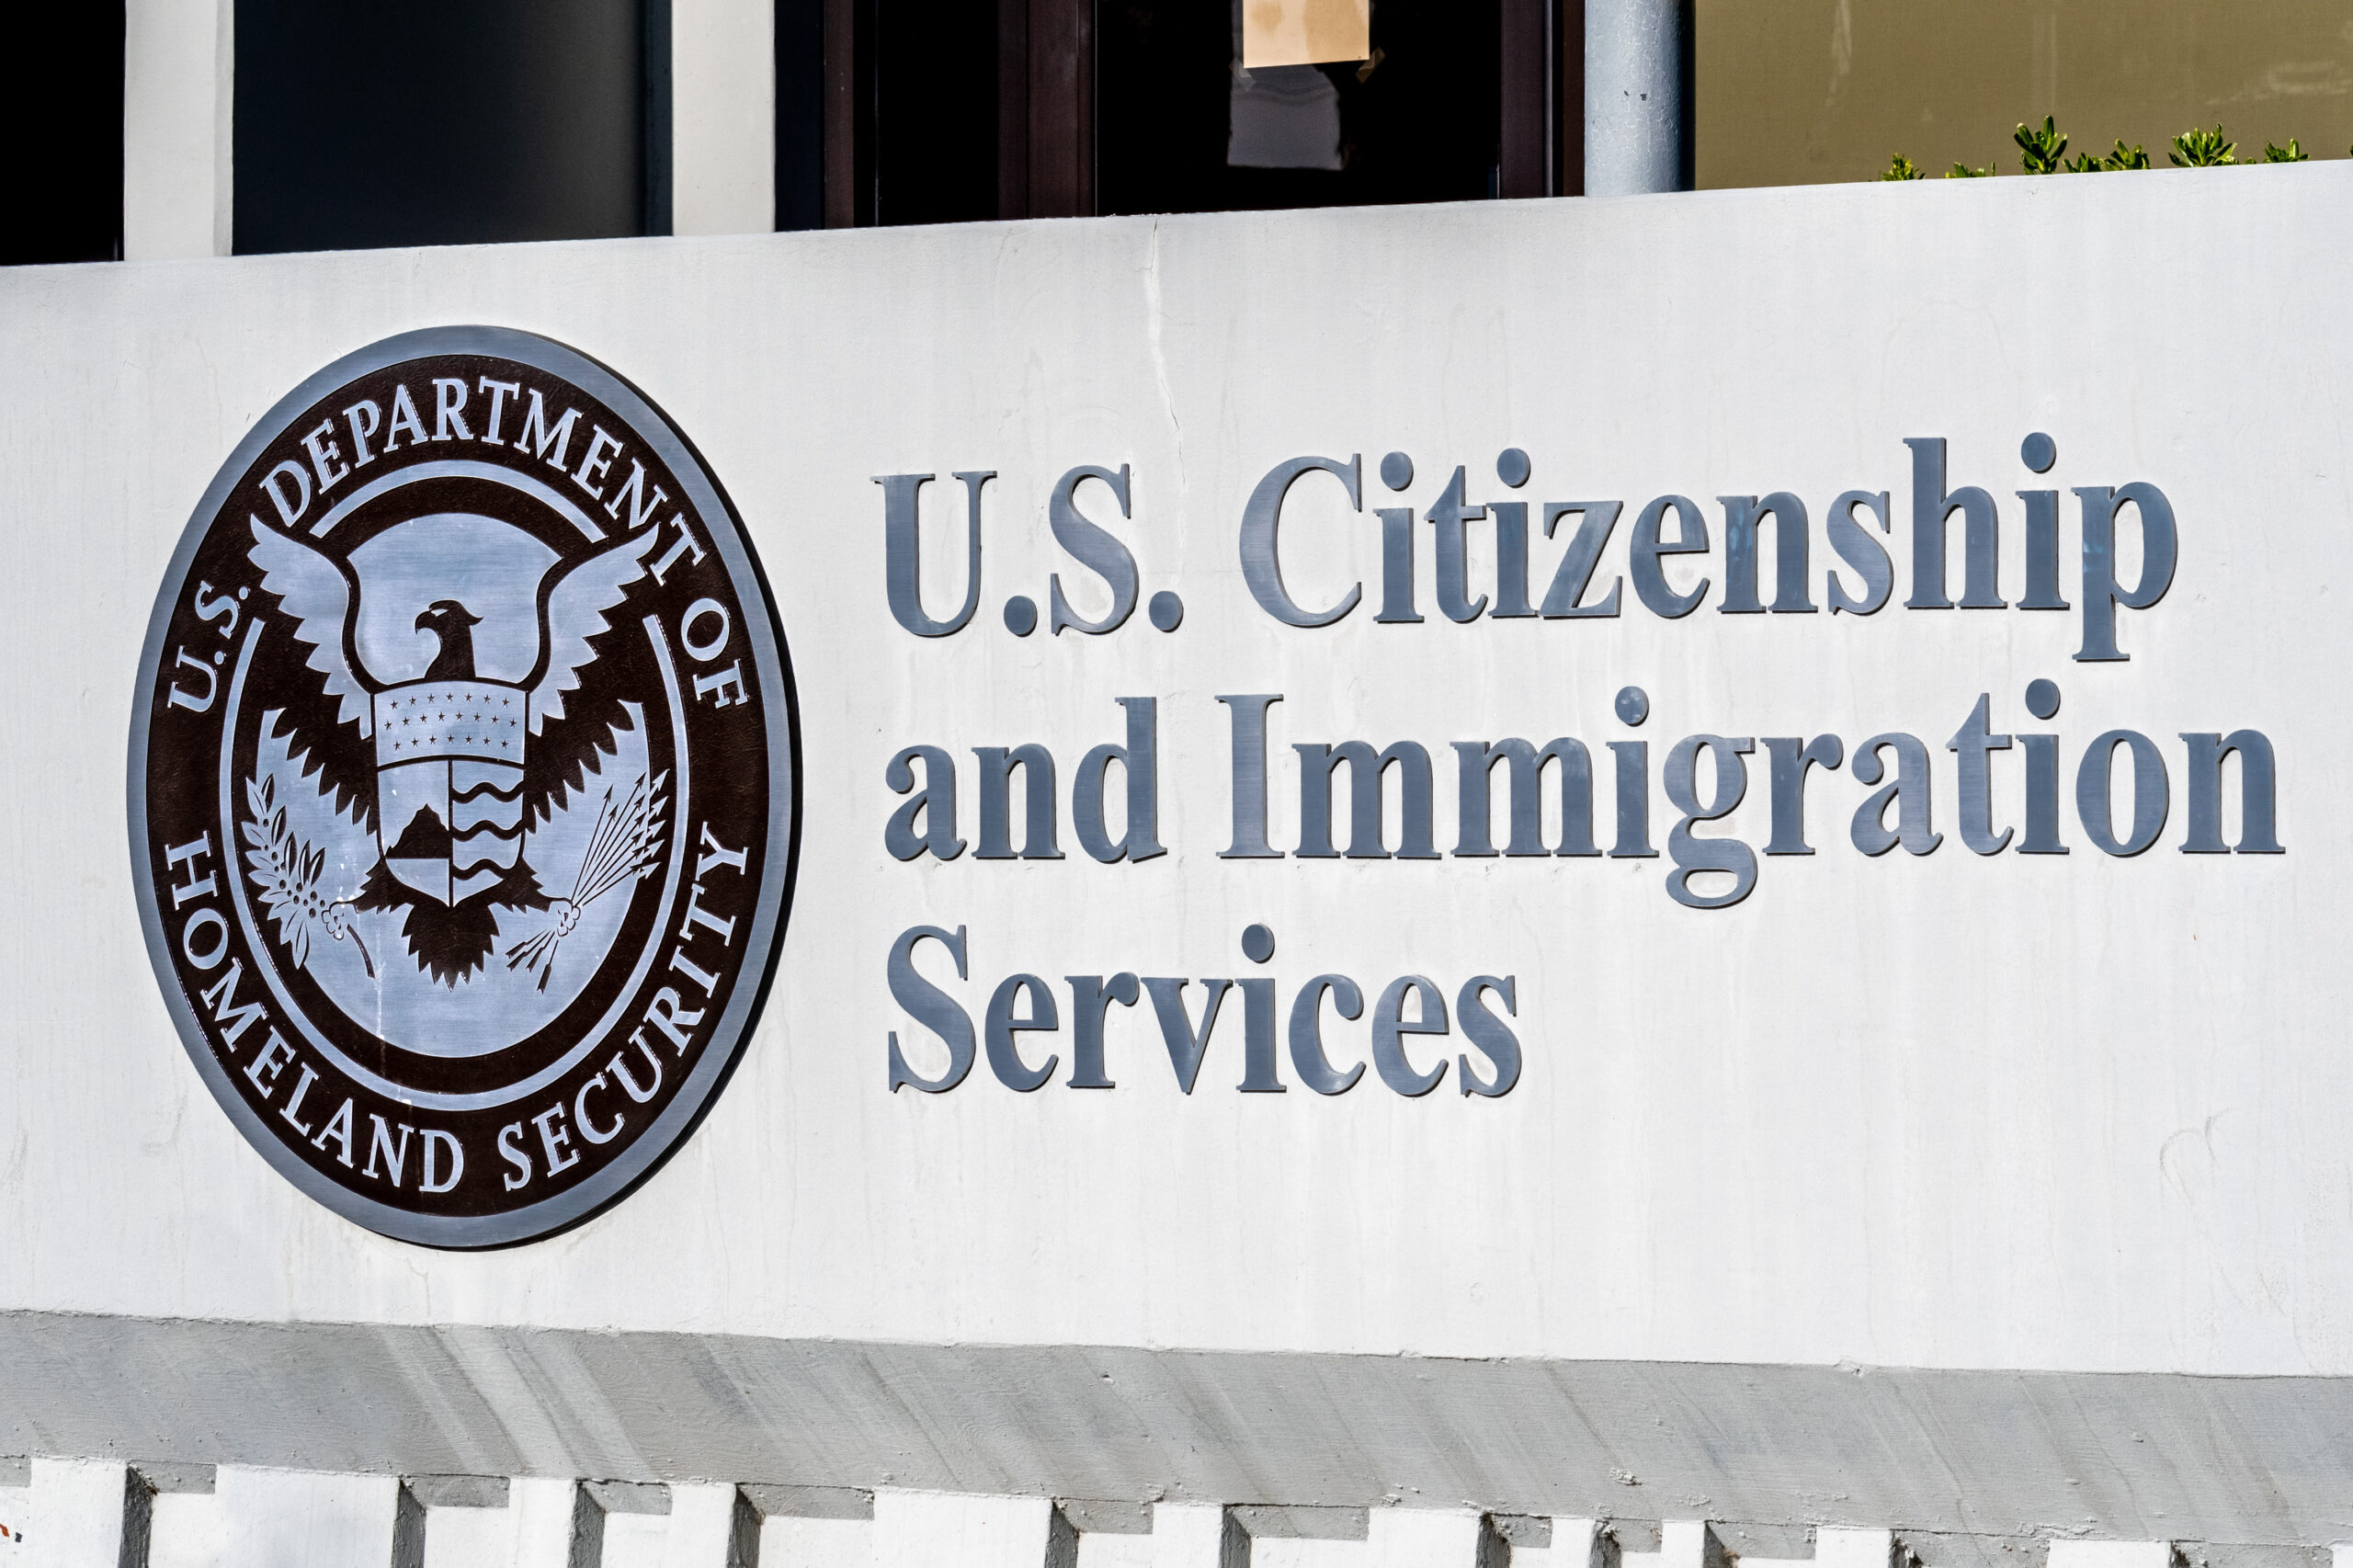 Flexibility in Responding to USCIS Requests Extended